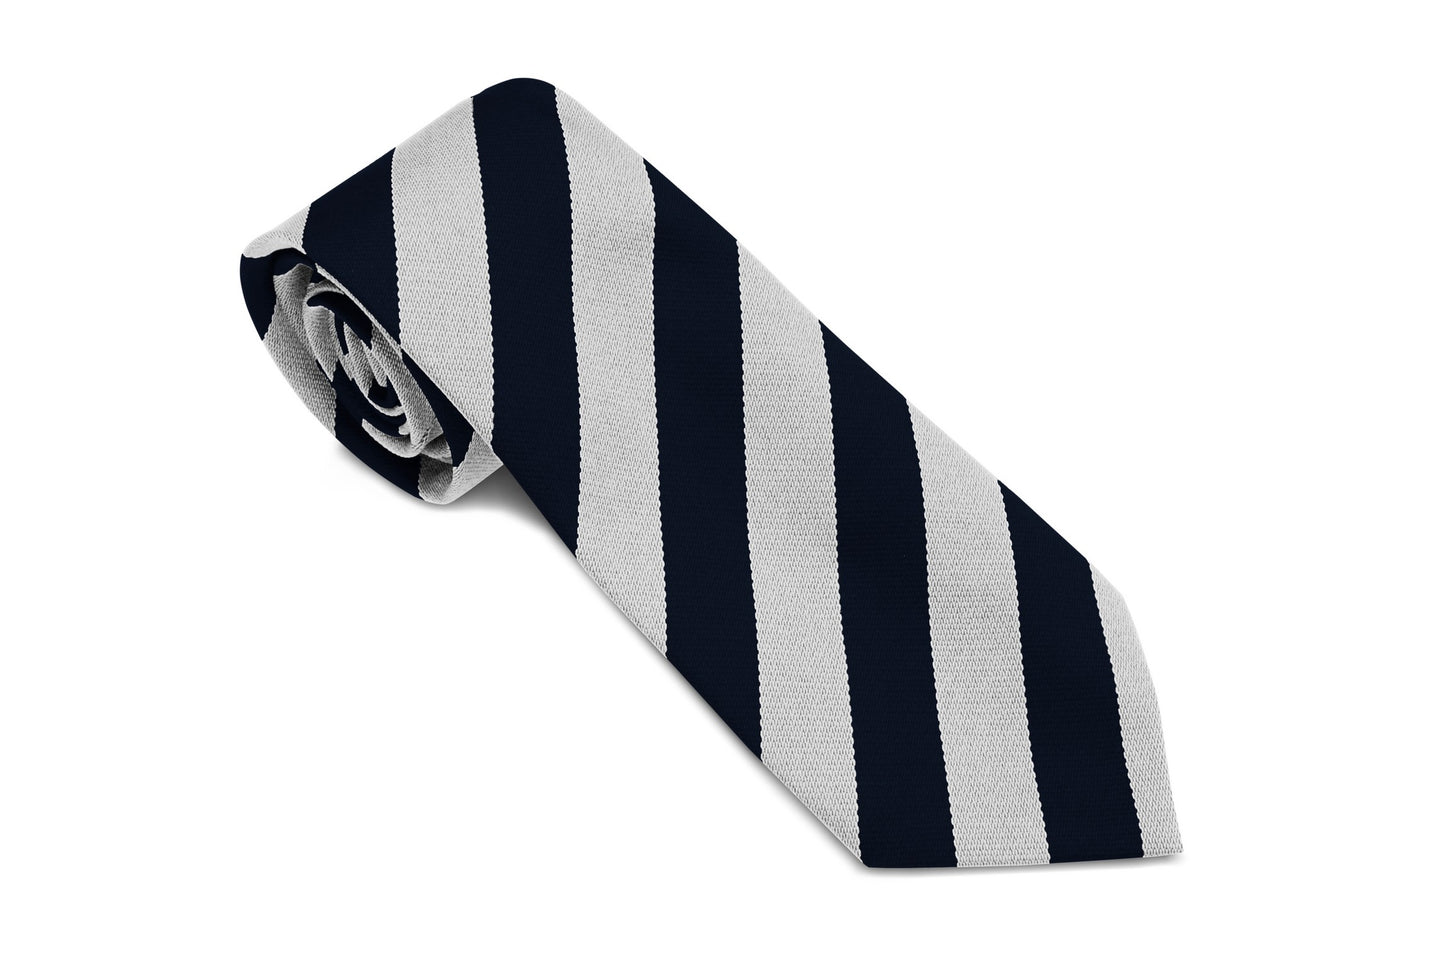 Stock Design Ties in Navy and White Equal Stripe (5404-9515) - Lynendo Trade Store